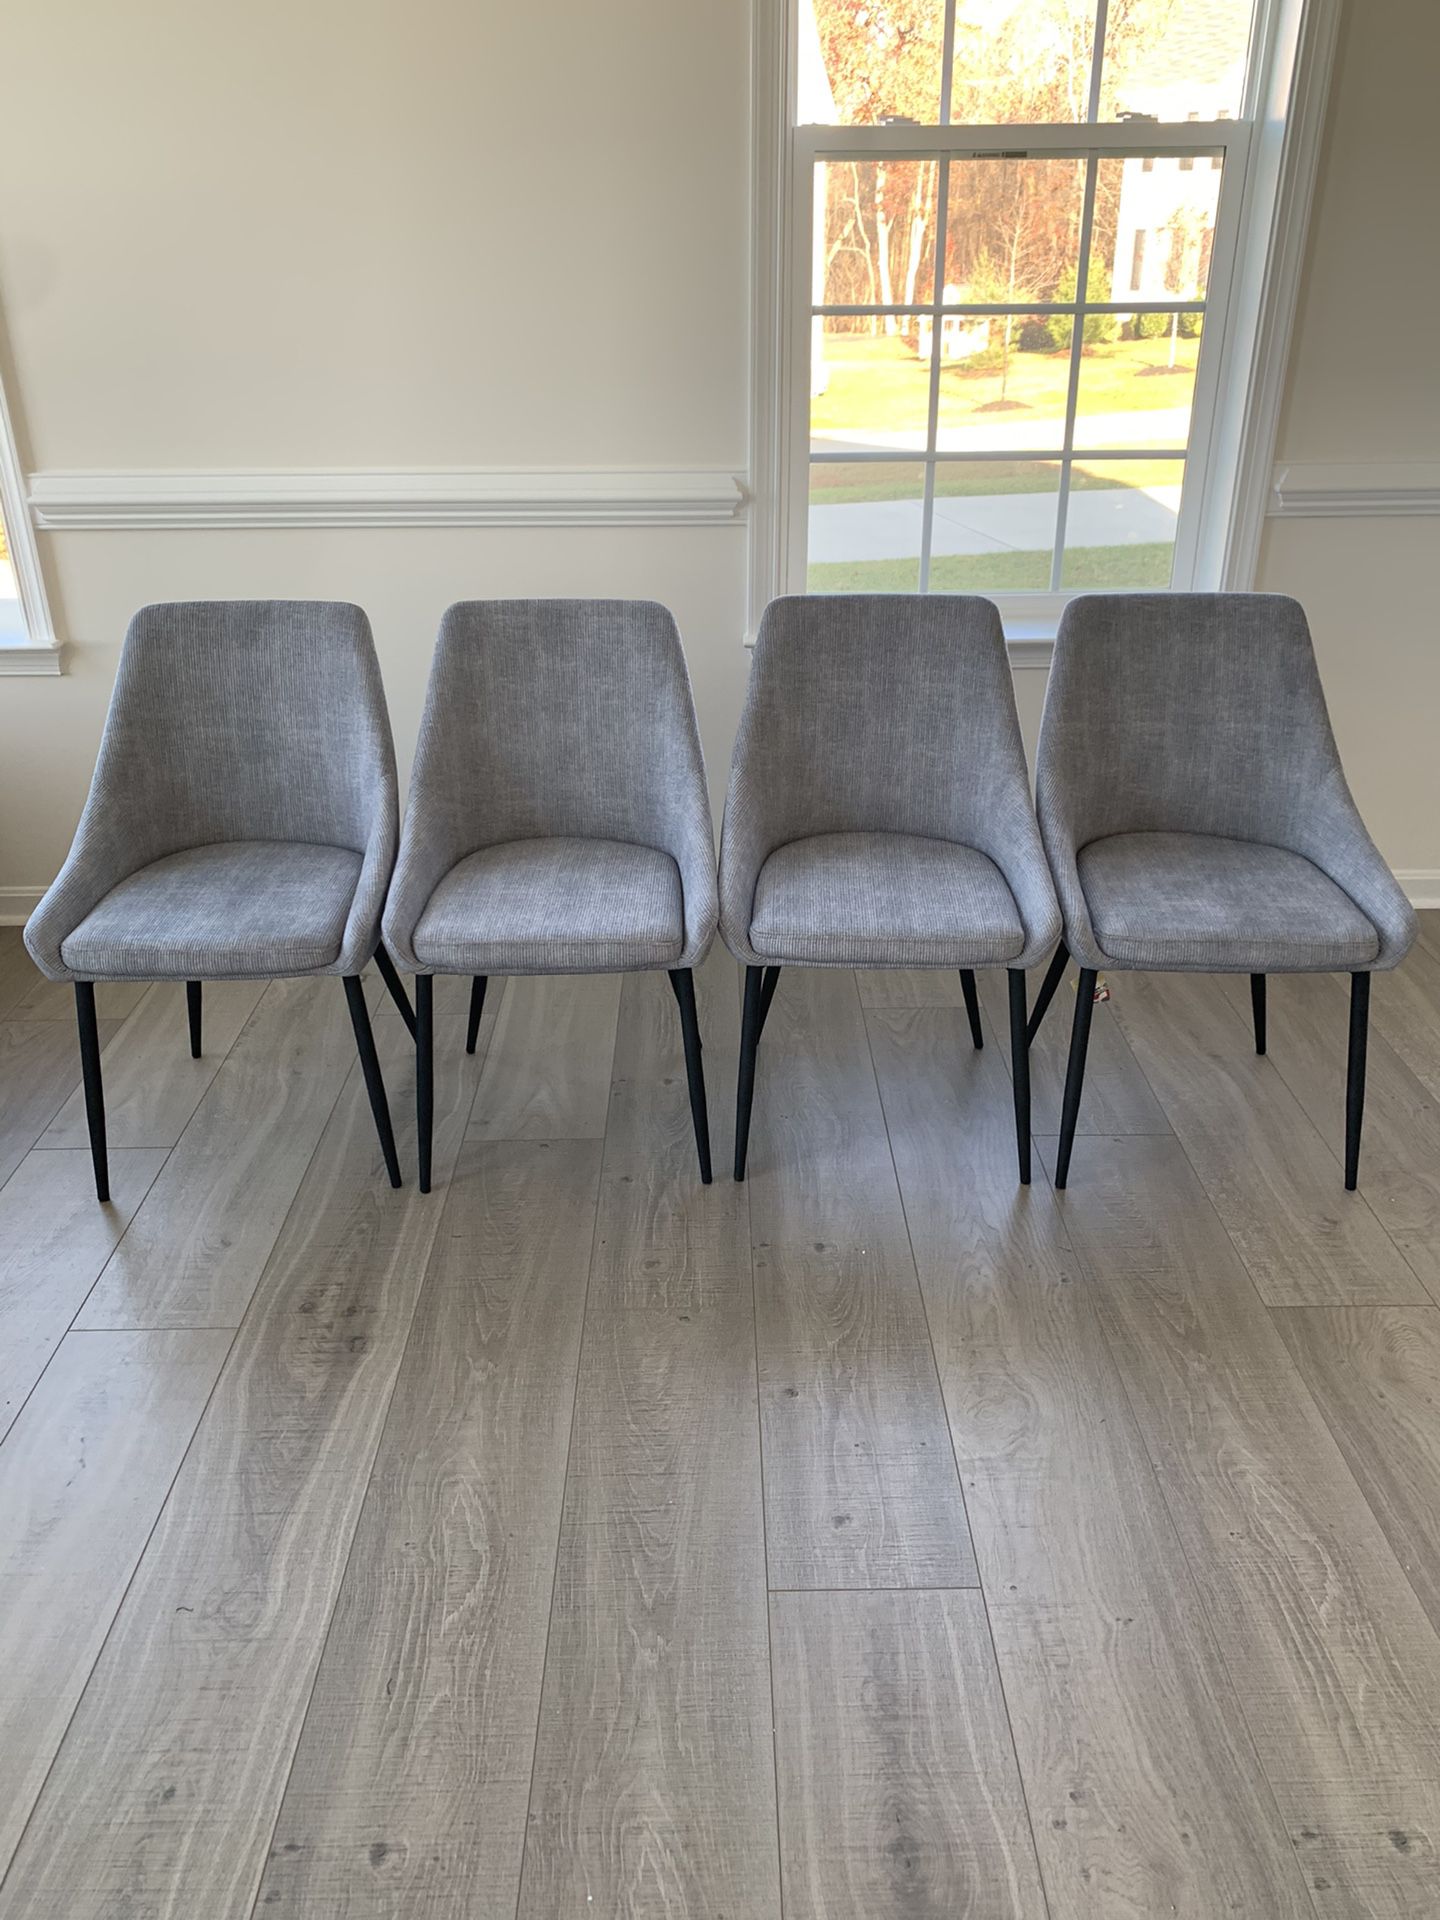 Set of 4 Brand New Upholstered Chairs ($50 each)